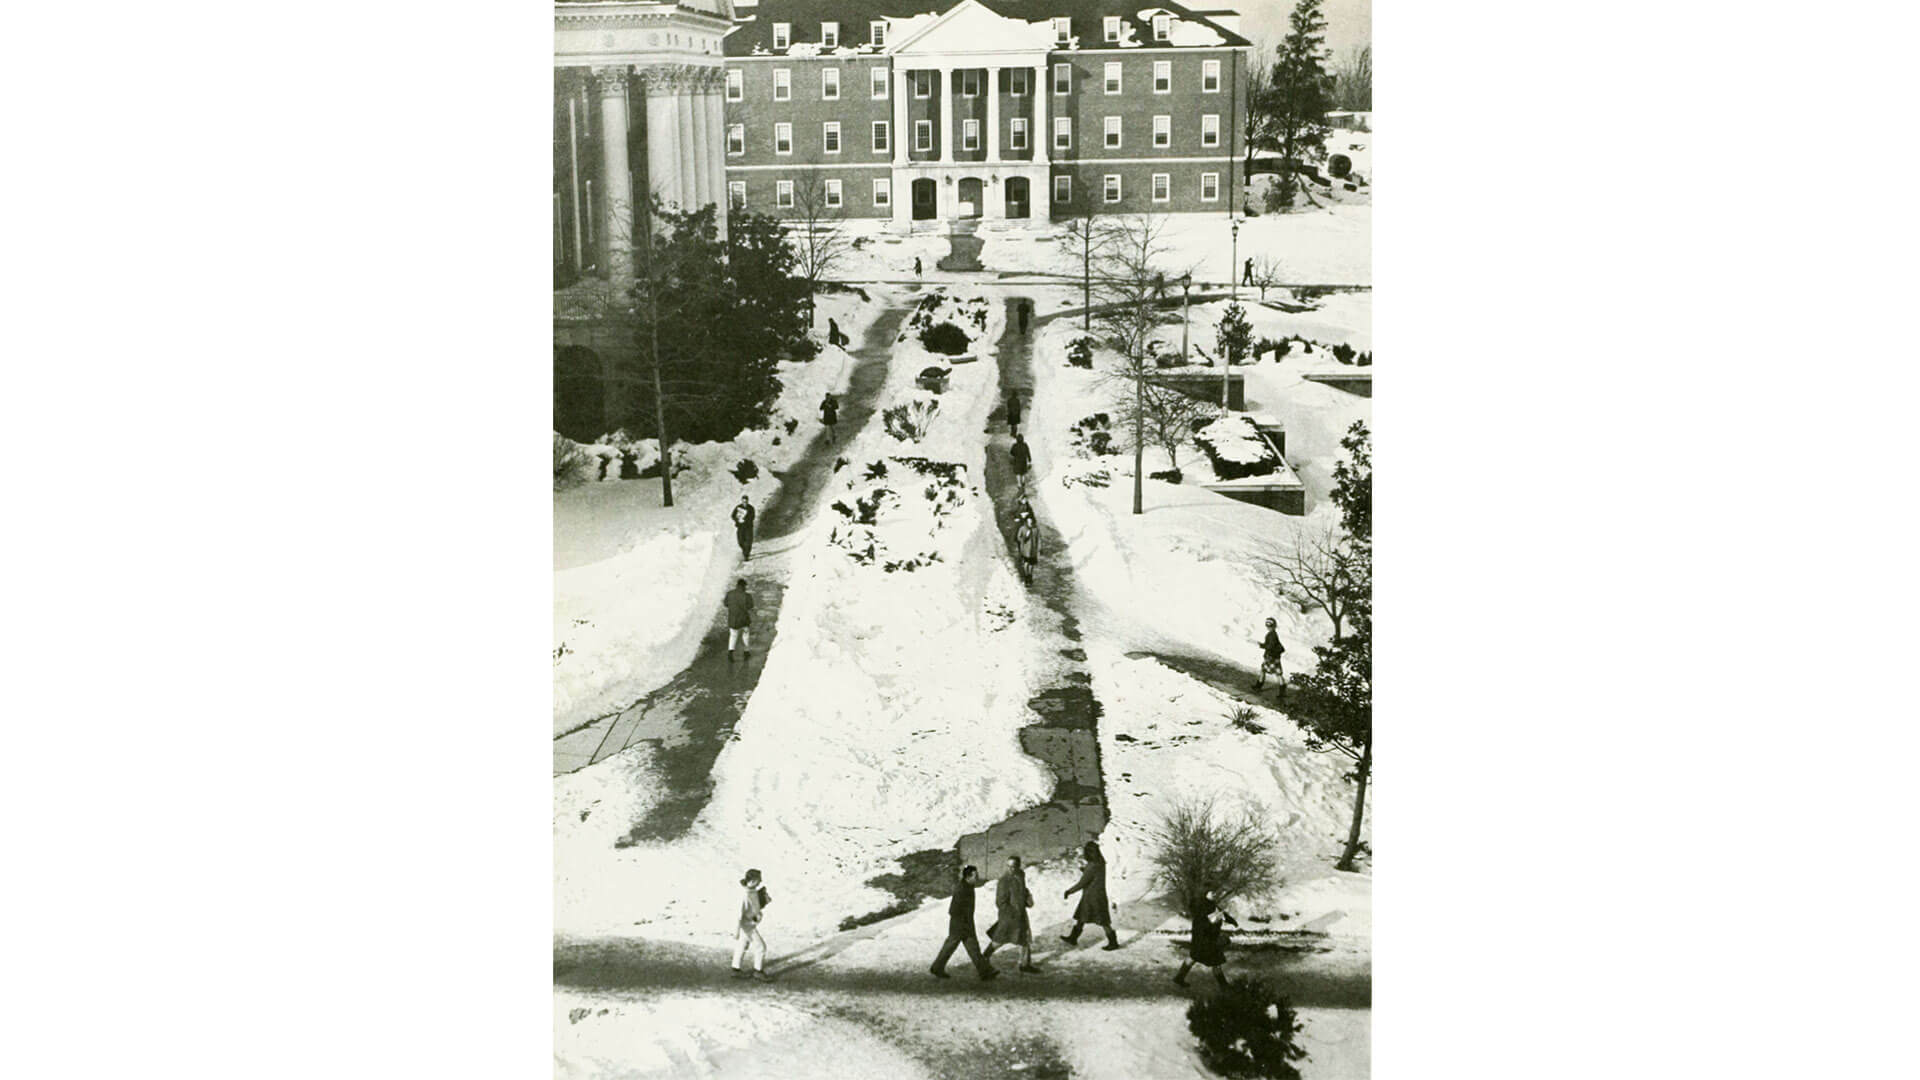 Snowy UMD campus photo from 1966